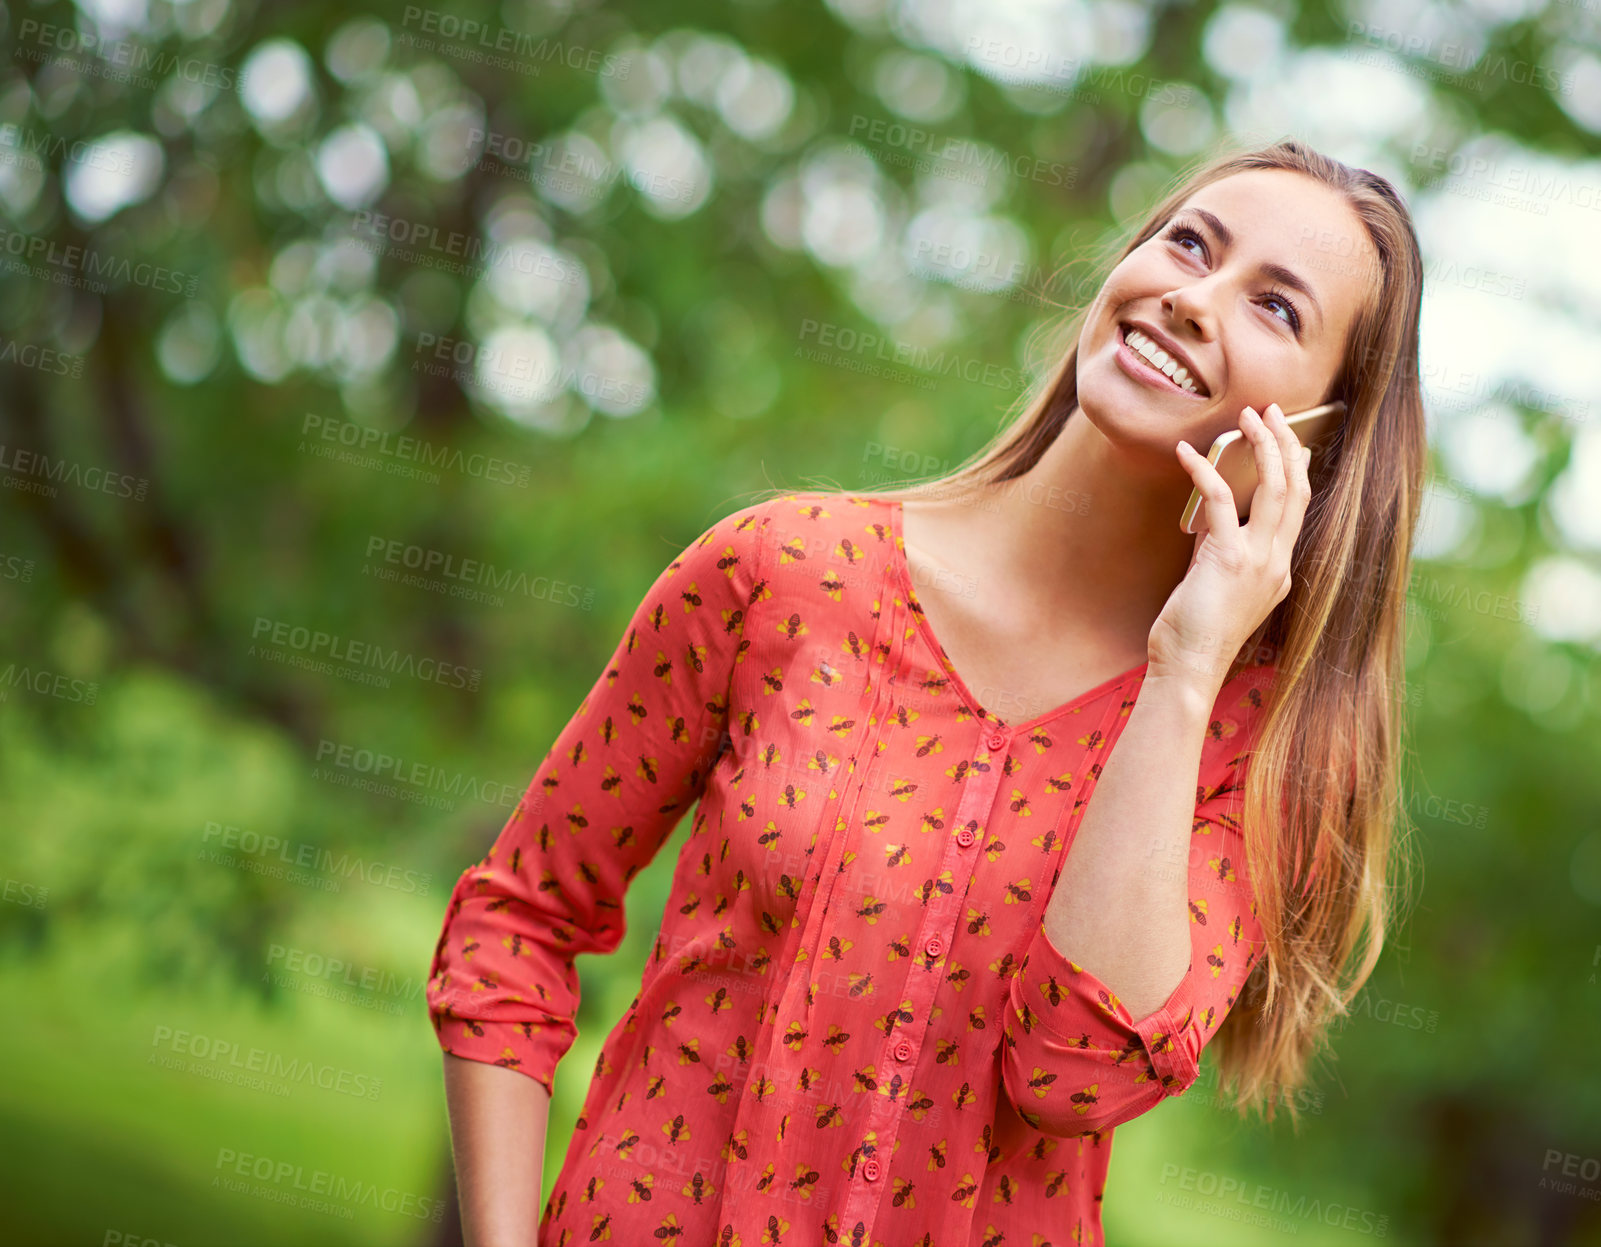 Buy stock photo Shot of a young woman talking on her cellphone outside